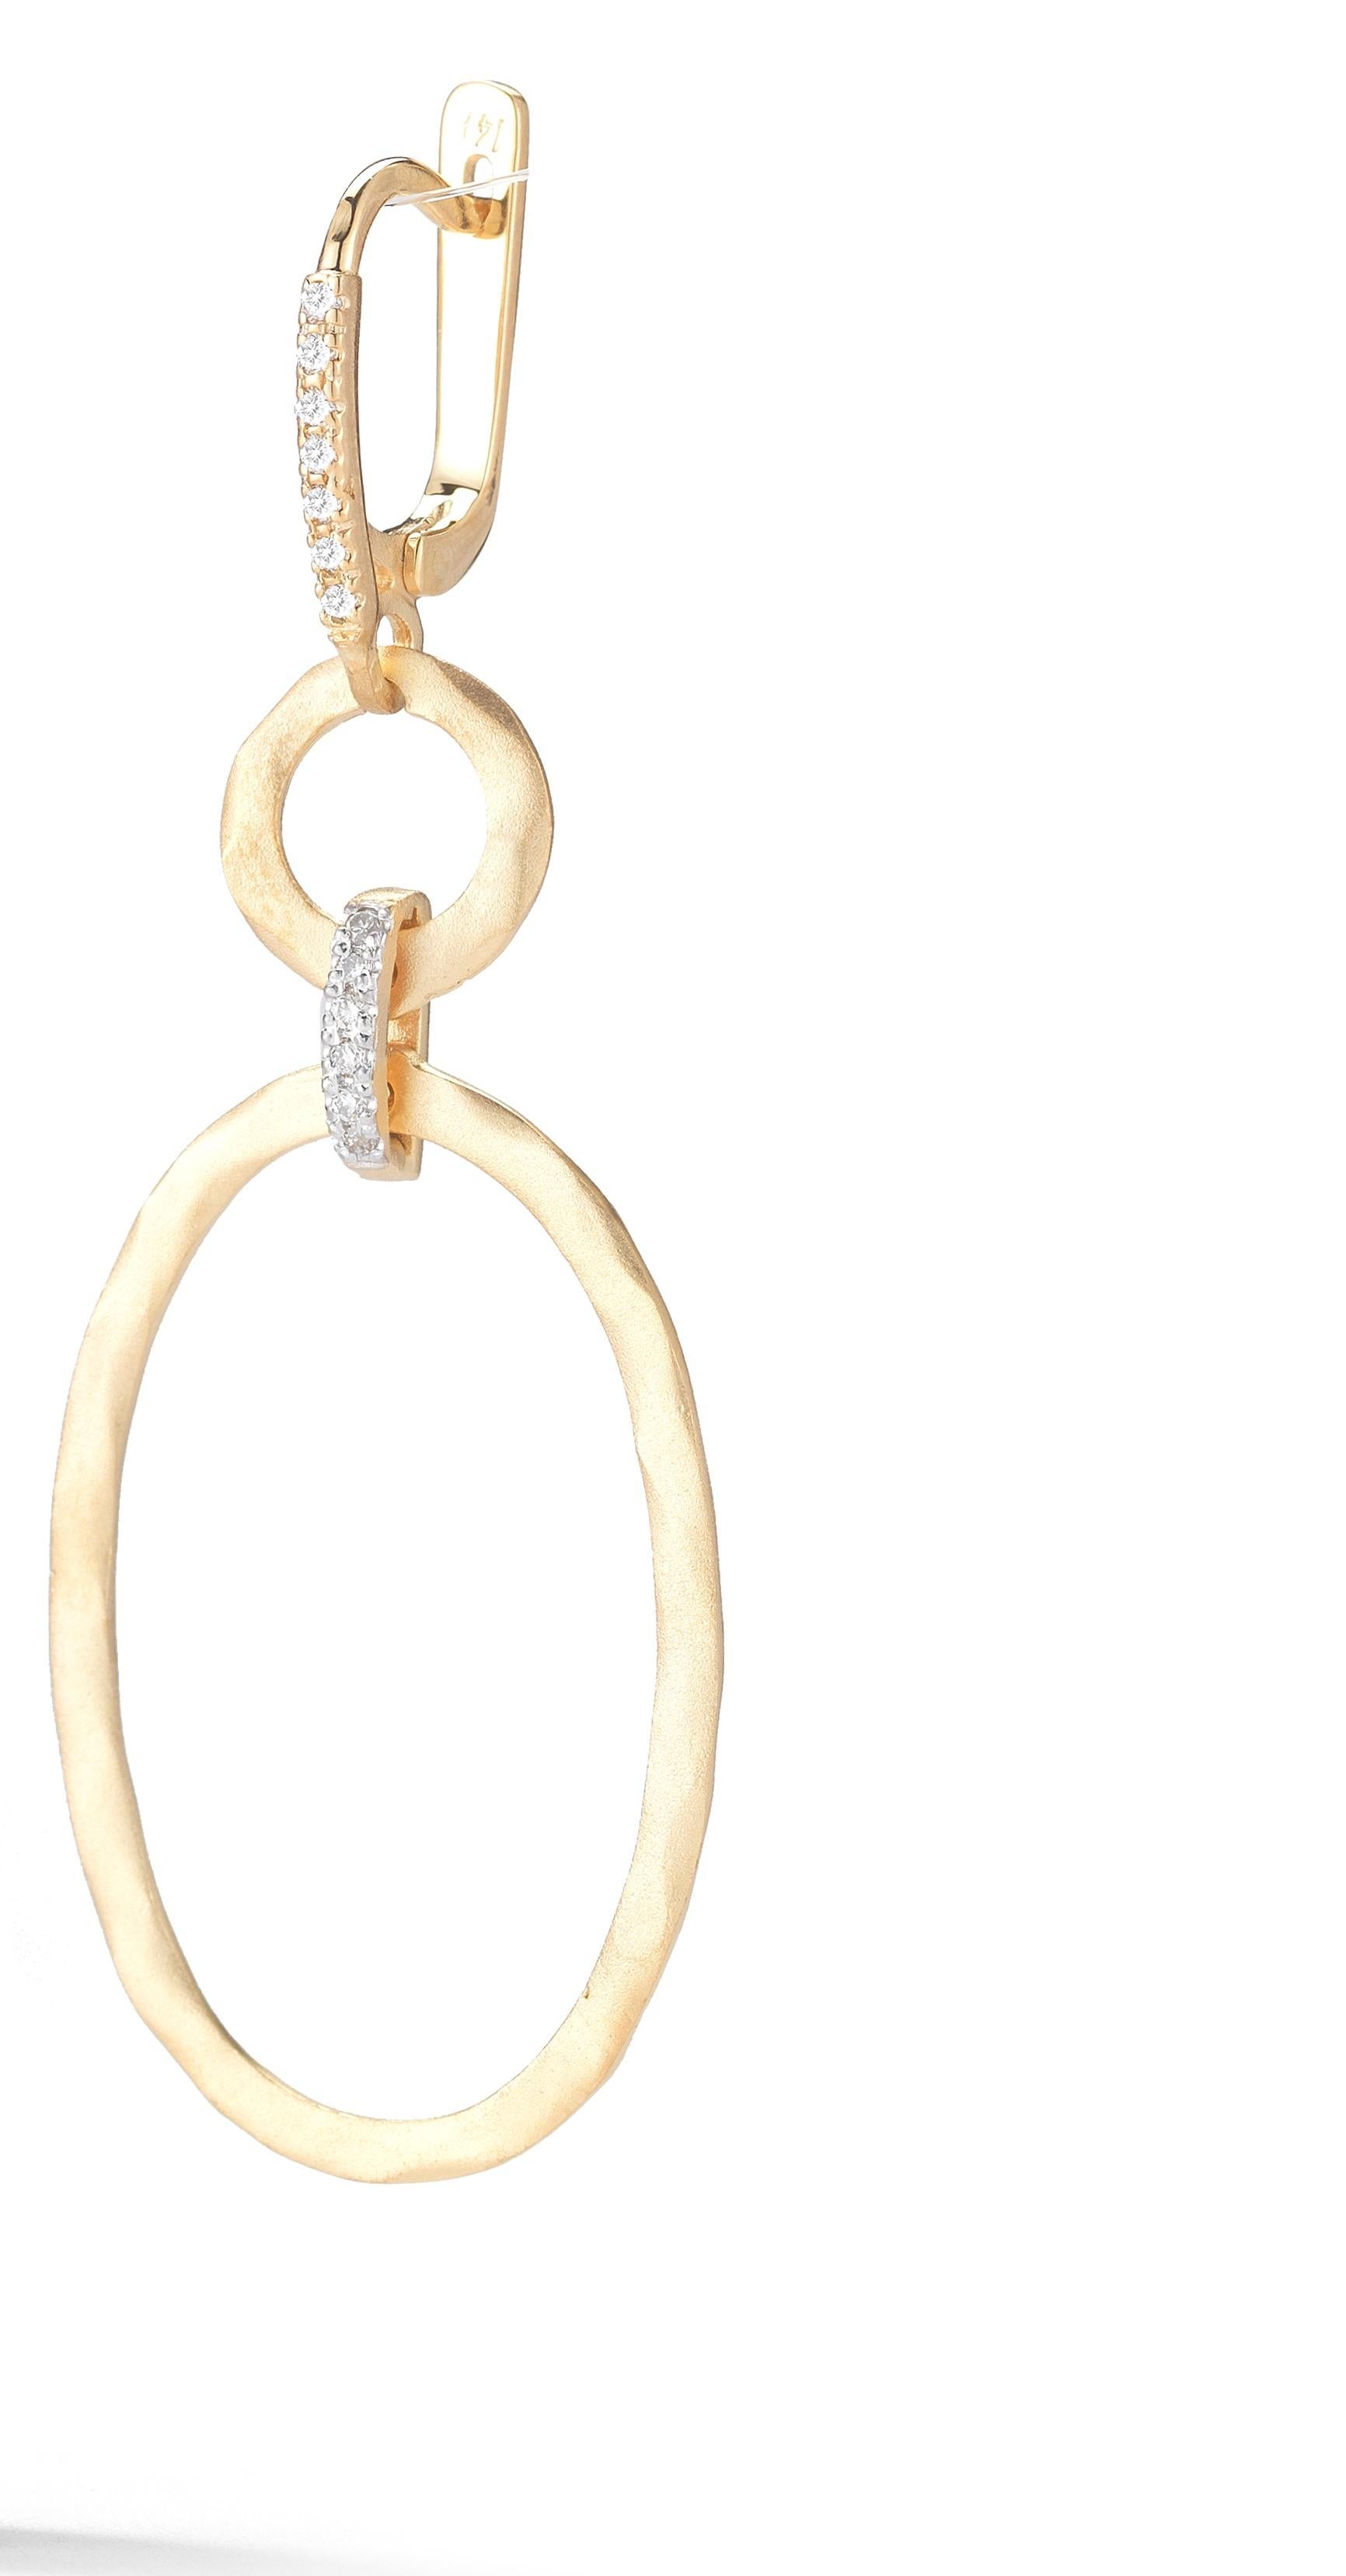 14 Karat Yellow Gold Hand-Crafted Matte and Hammer-Finished Dangling Open Link Oval-Shaped Earrings, Accented with 0.18 Carats of Pave Set Diamonds with Leverback Closure.
